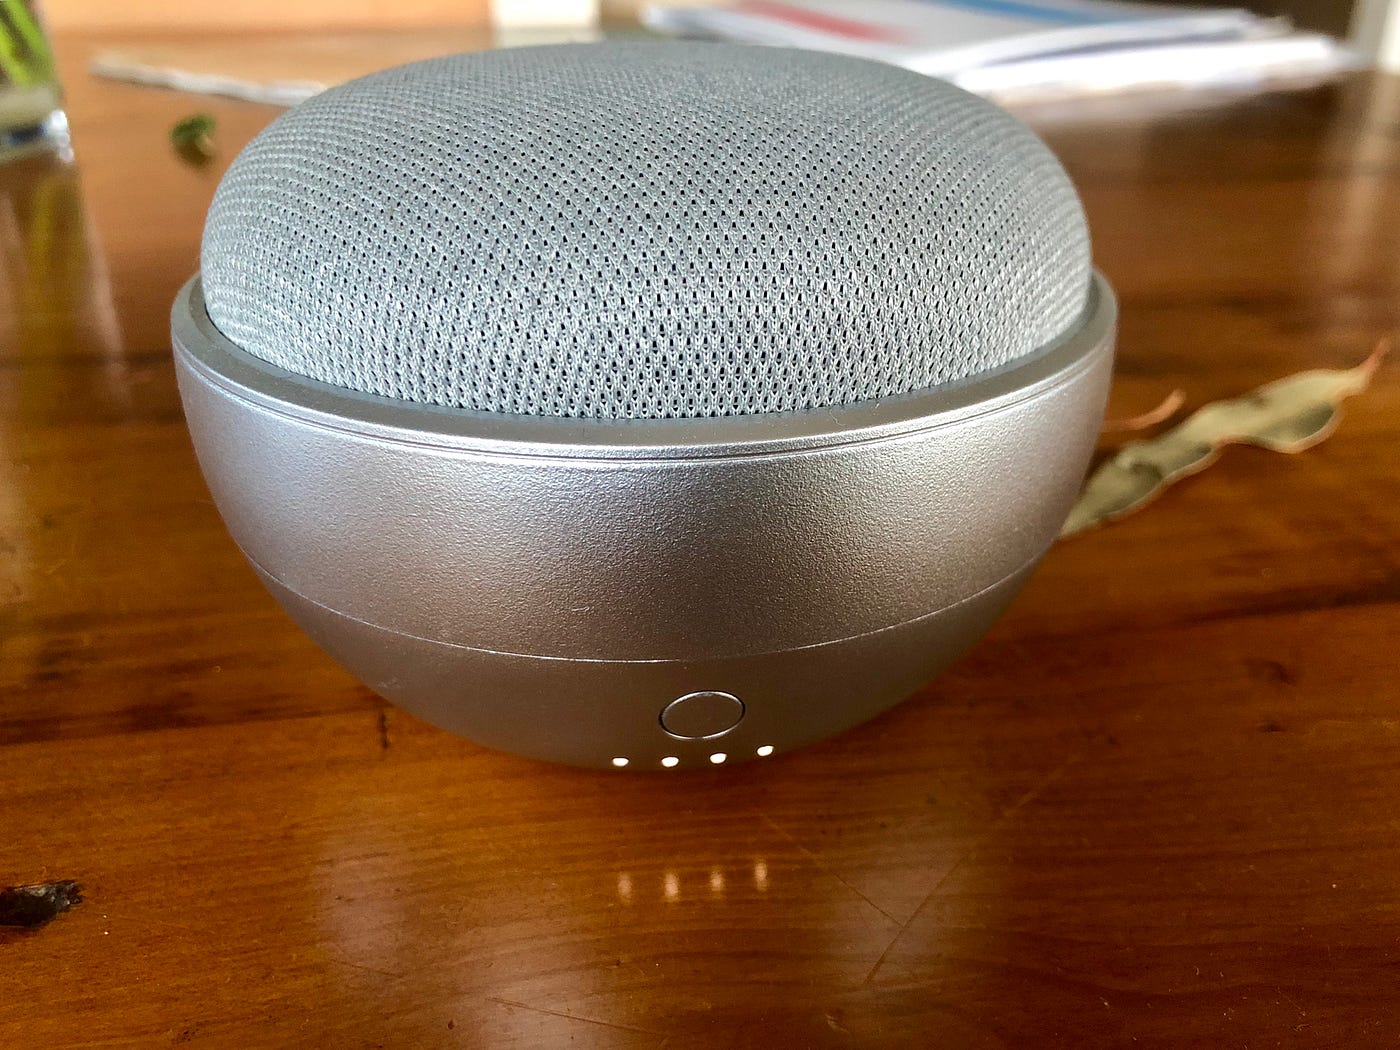 Taking my Google Home Mini with me is now a thing | by Alan Jones | Medium